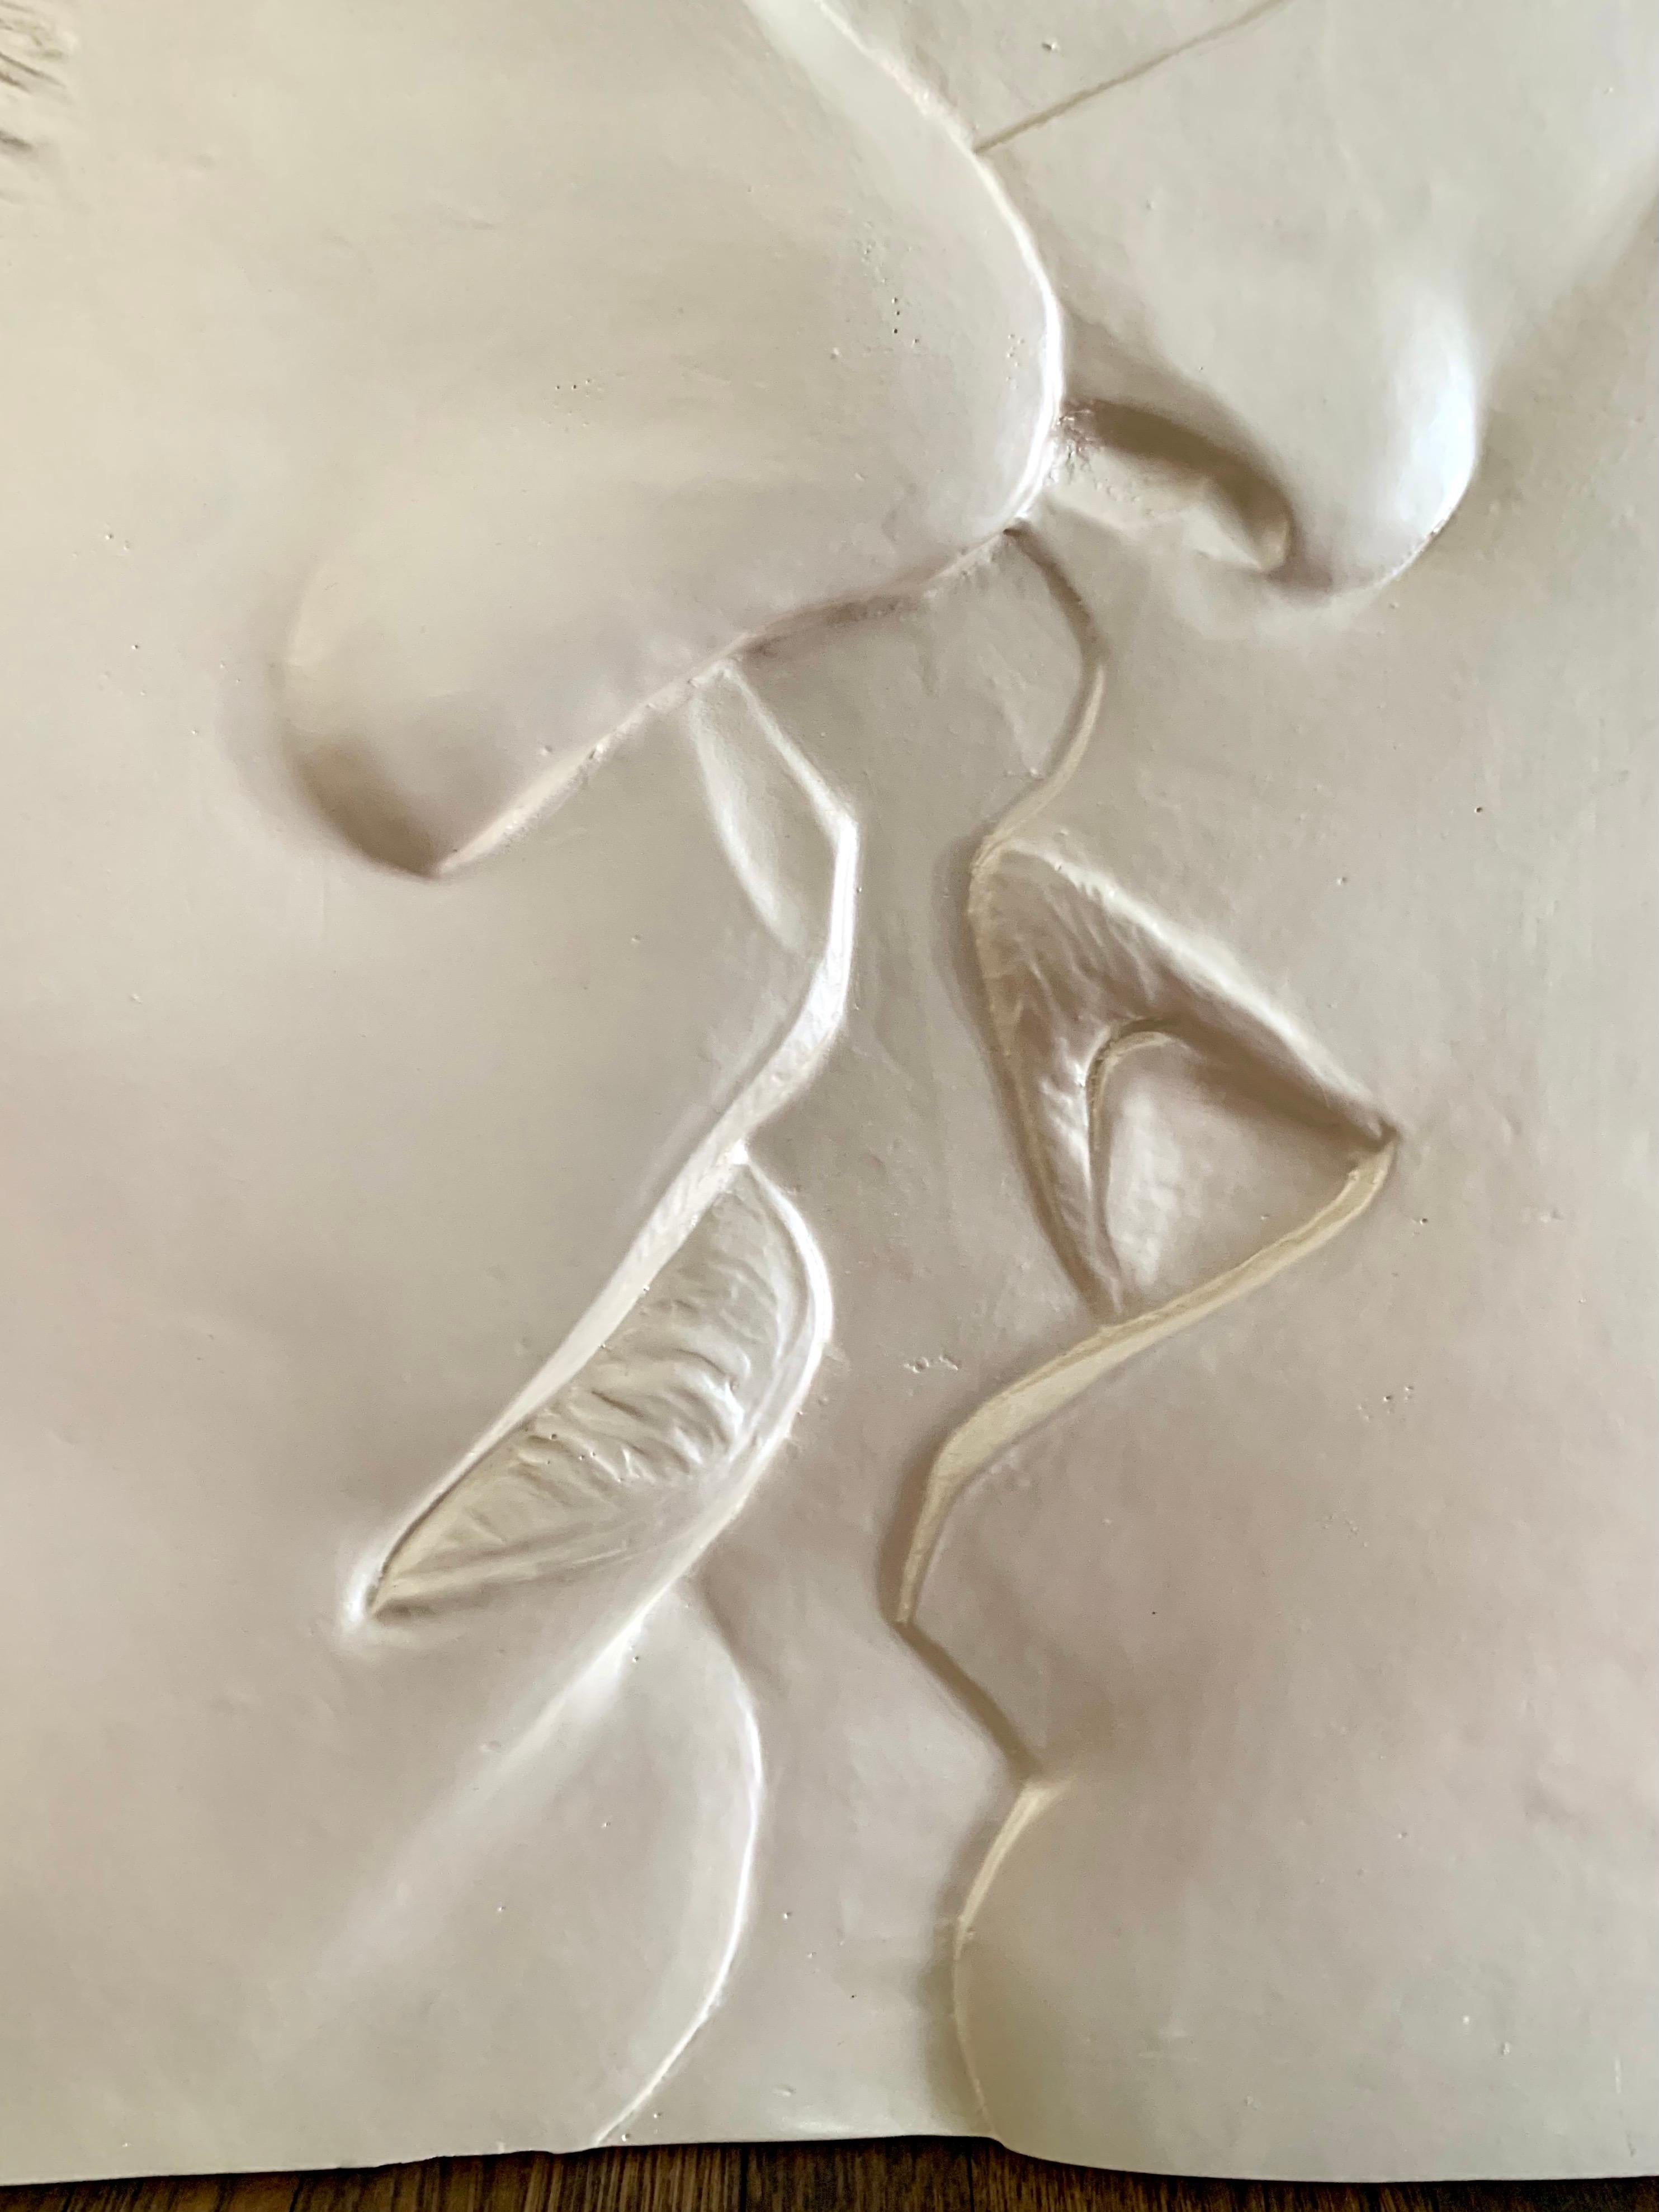 Signed 3-D plaster relief sculpture of a kiss. Signed lower right Figler 90.
Sculpture is meant to lean against a wall as there is no hardware for mounting. Made of solid plaster and is very heavy.